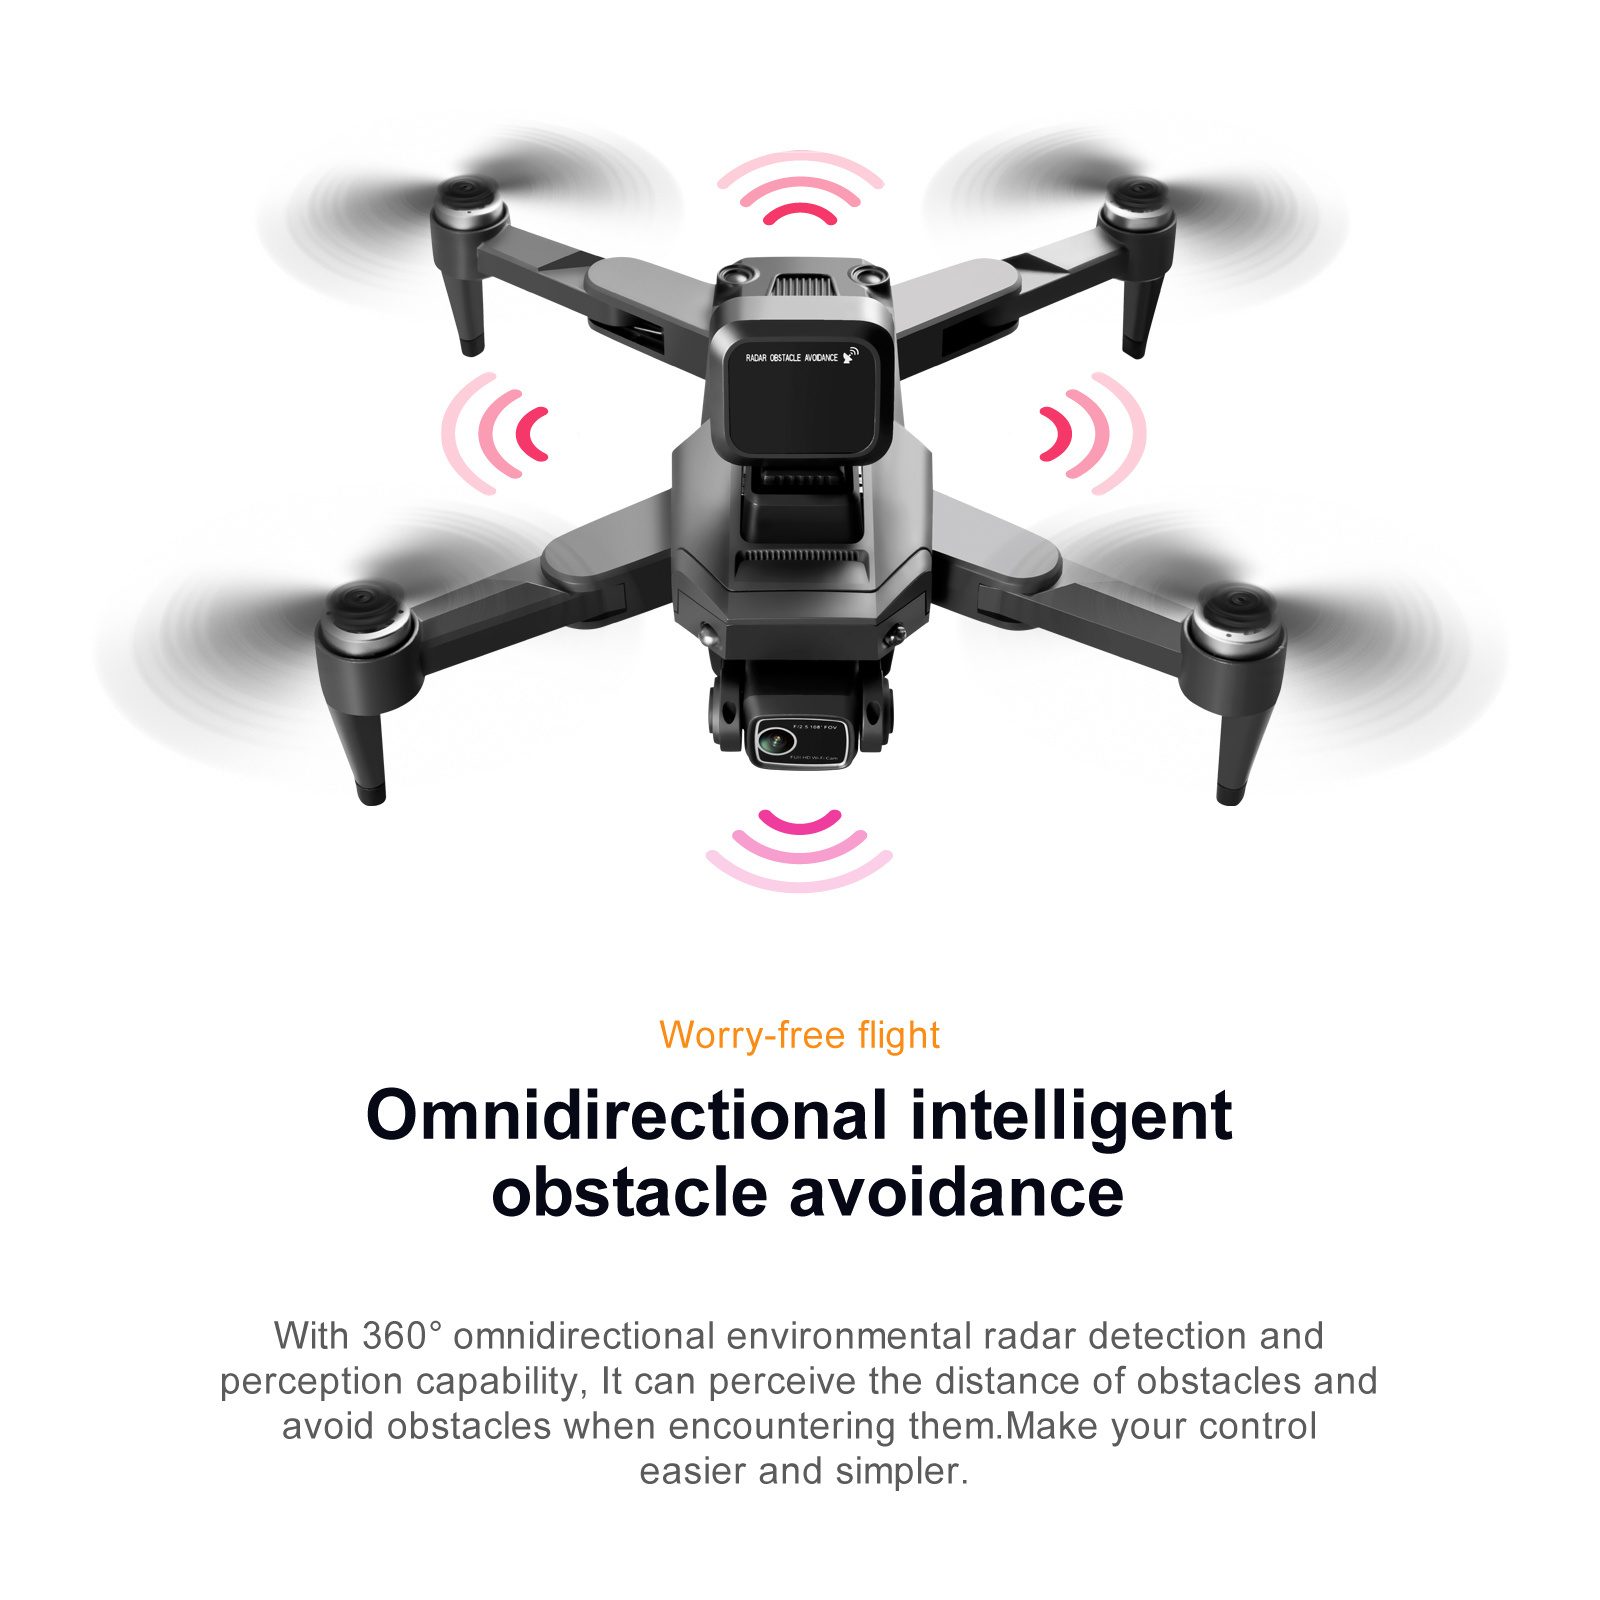 kxmg new s109 drone gps hd professional hd camera obstacle avoidance aerial photography brushless foldable quadcopter 100m rc drone toy uav details 6